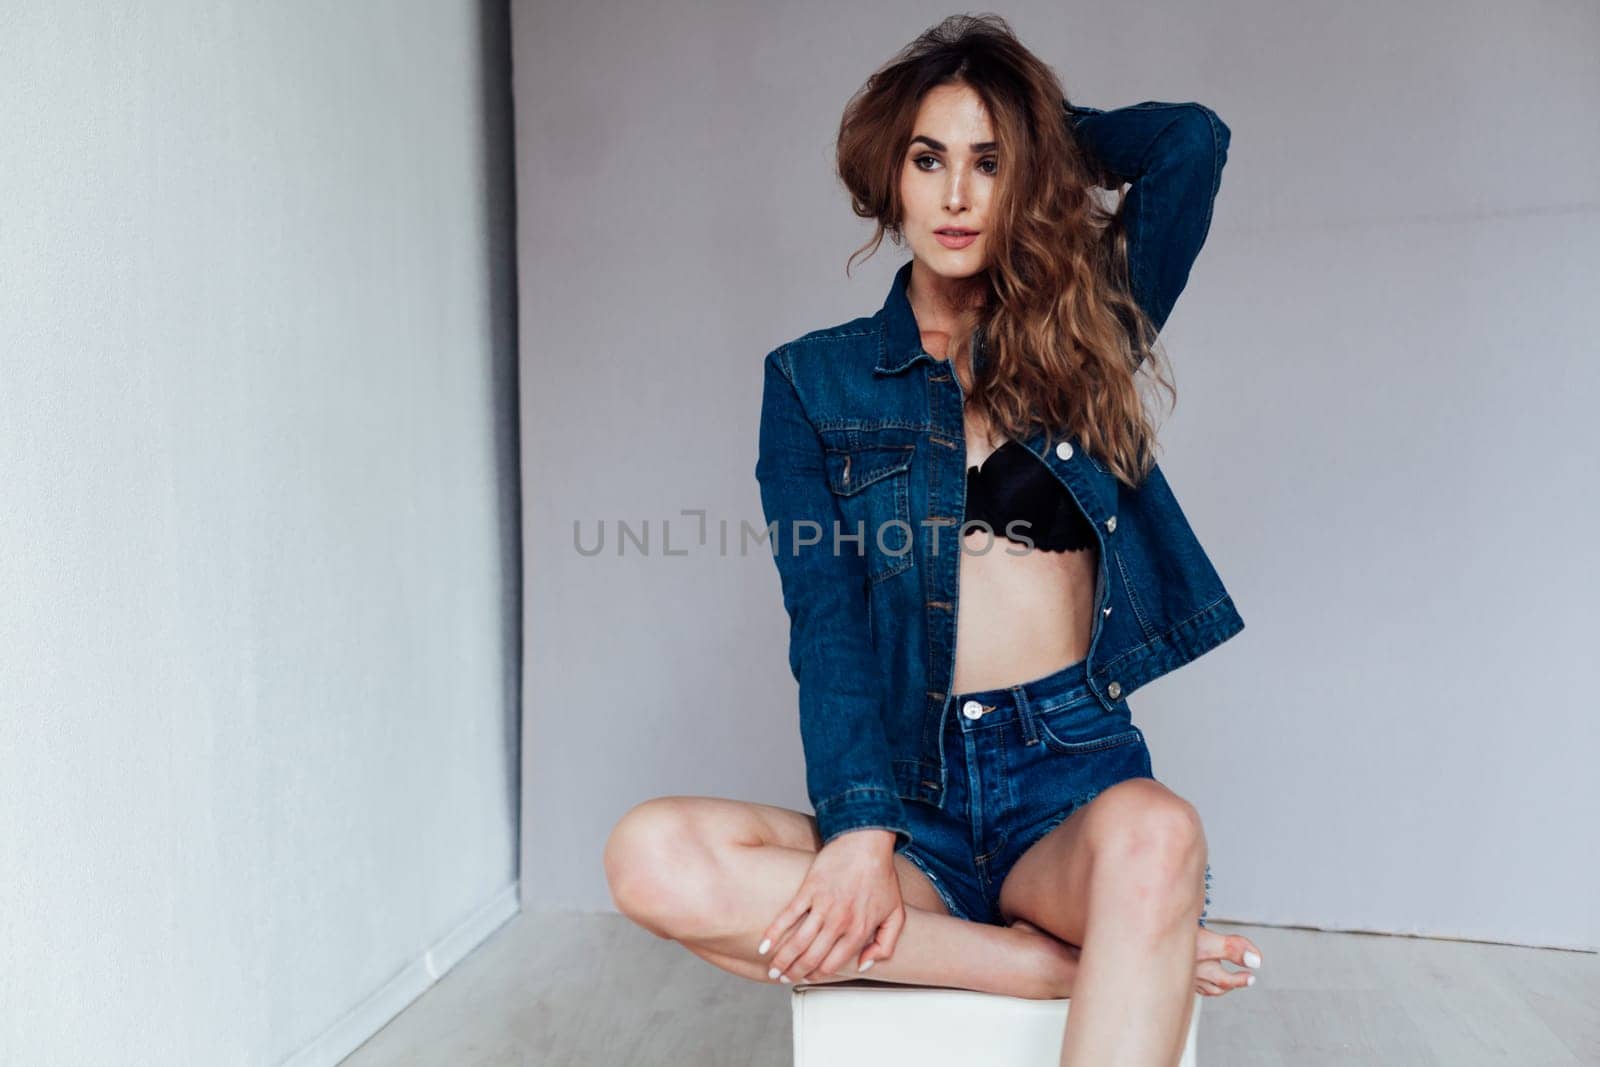 Portrait of a fashionable woman in lingerie and jeans